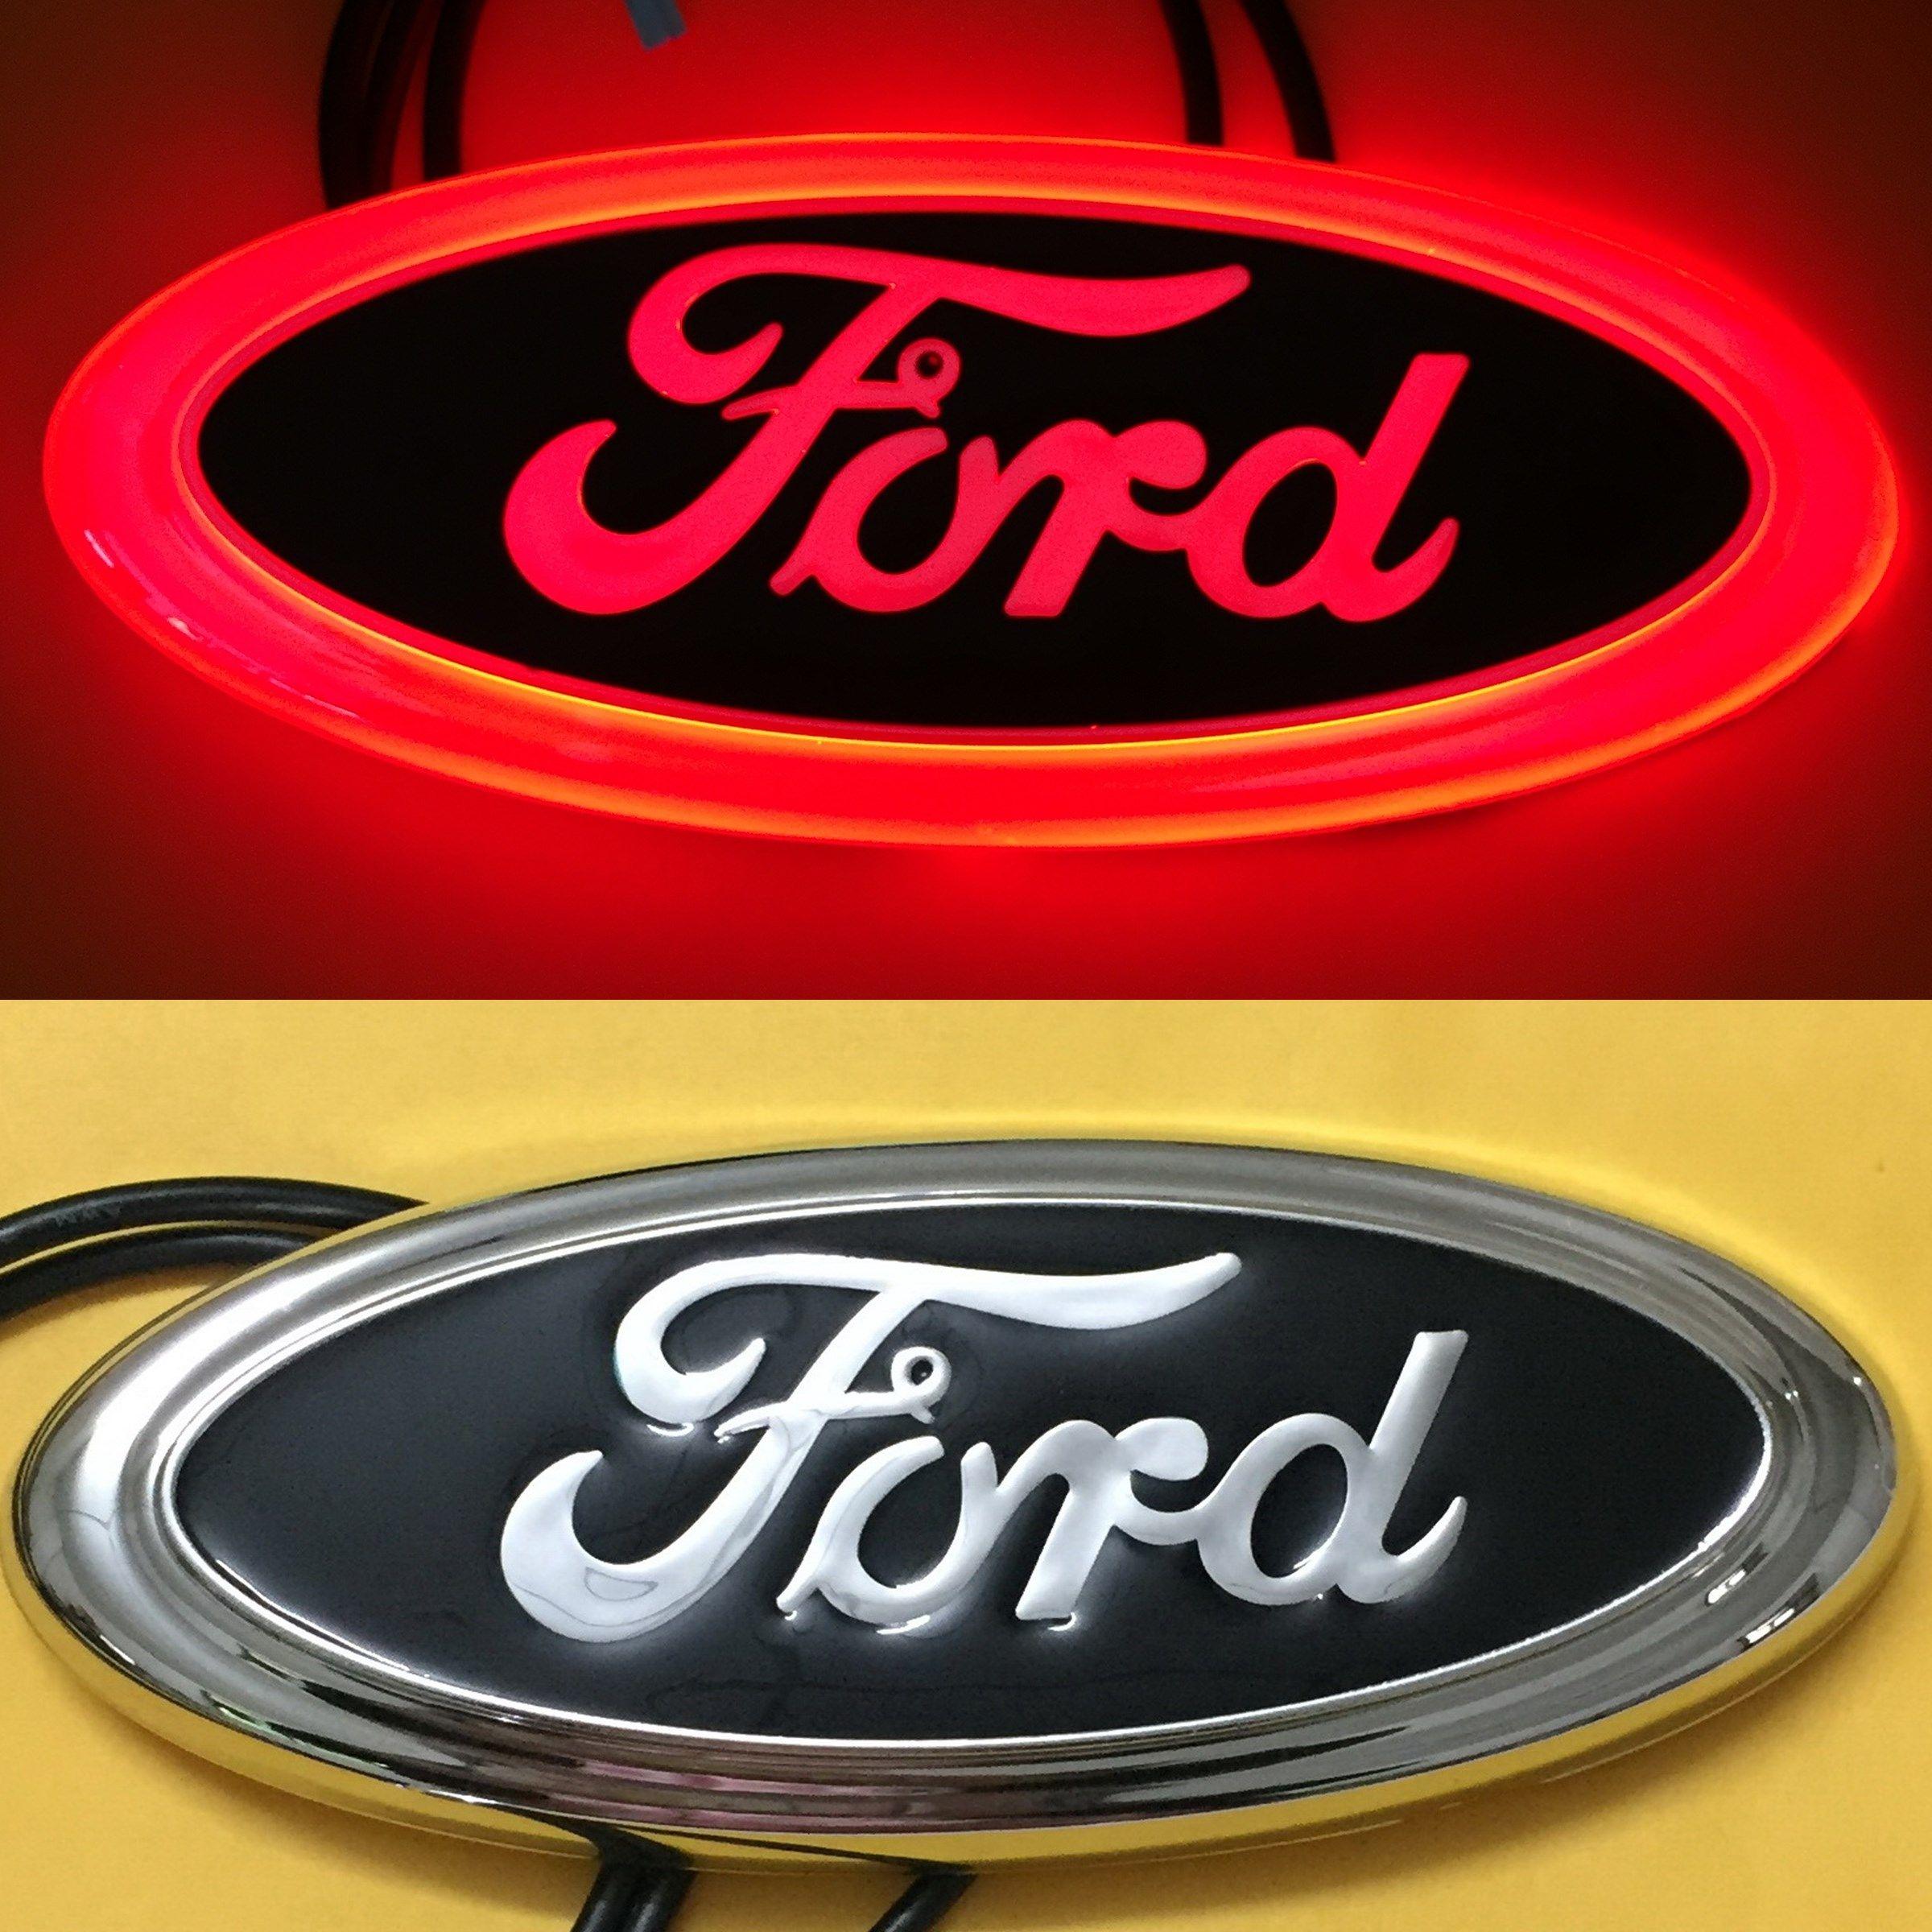 Red Oval Auto Logo - 4D LED Car Tail Logo Red Light for Ford Focus Mondeo Kuga Auto Badge